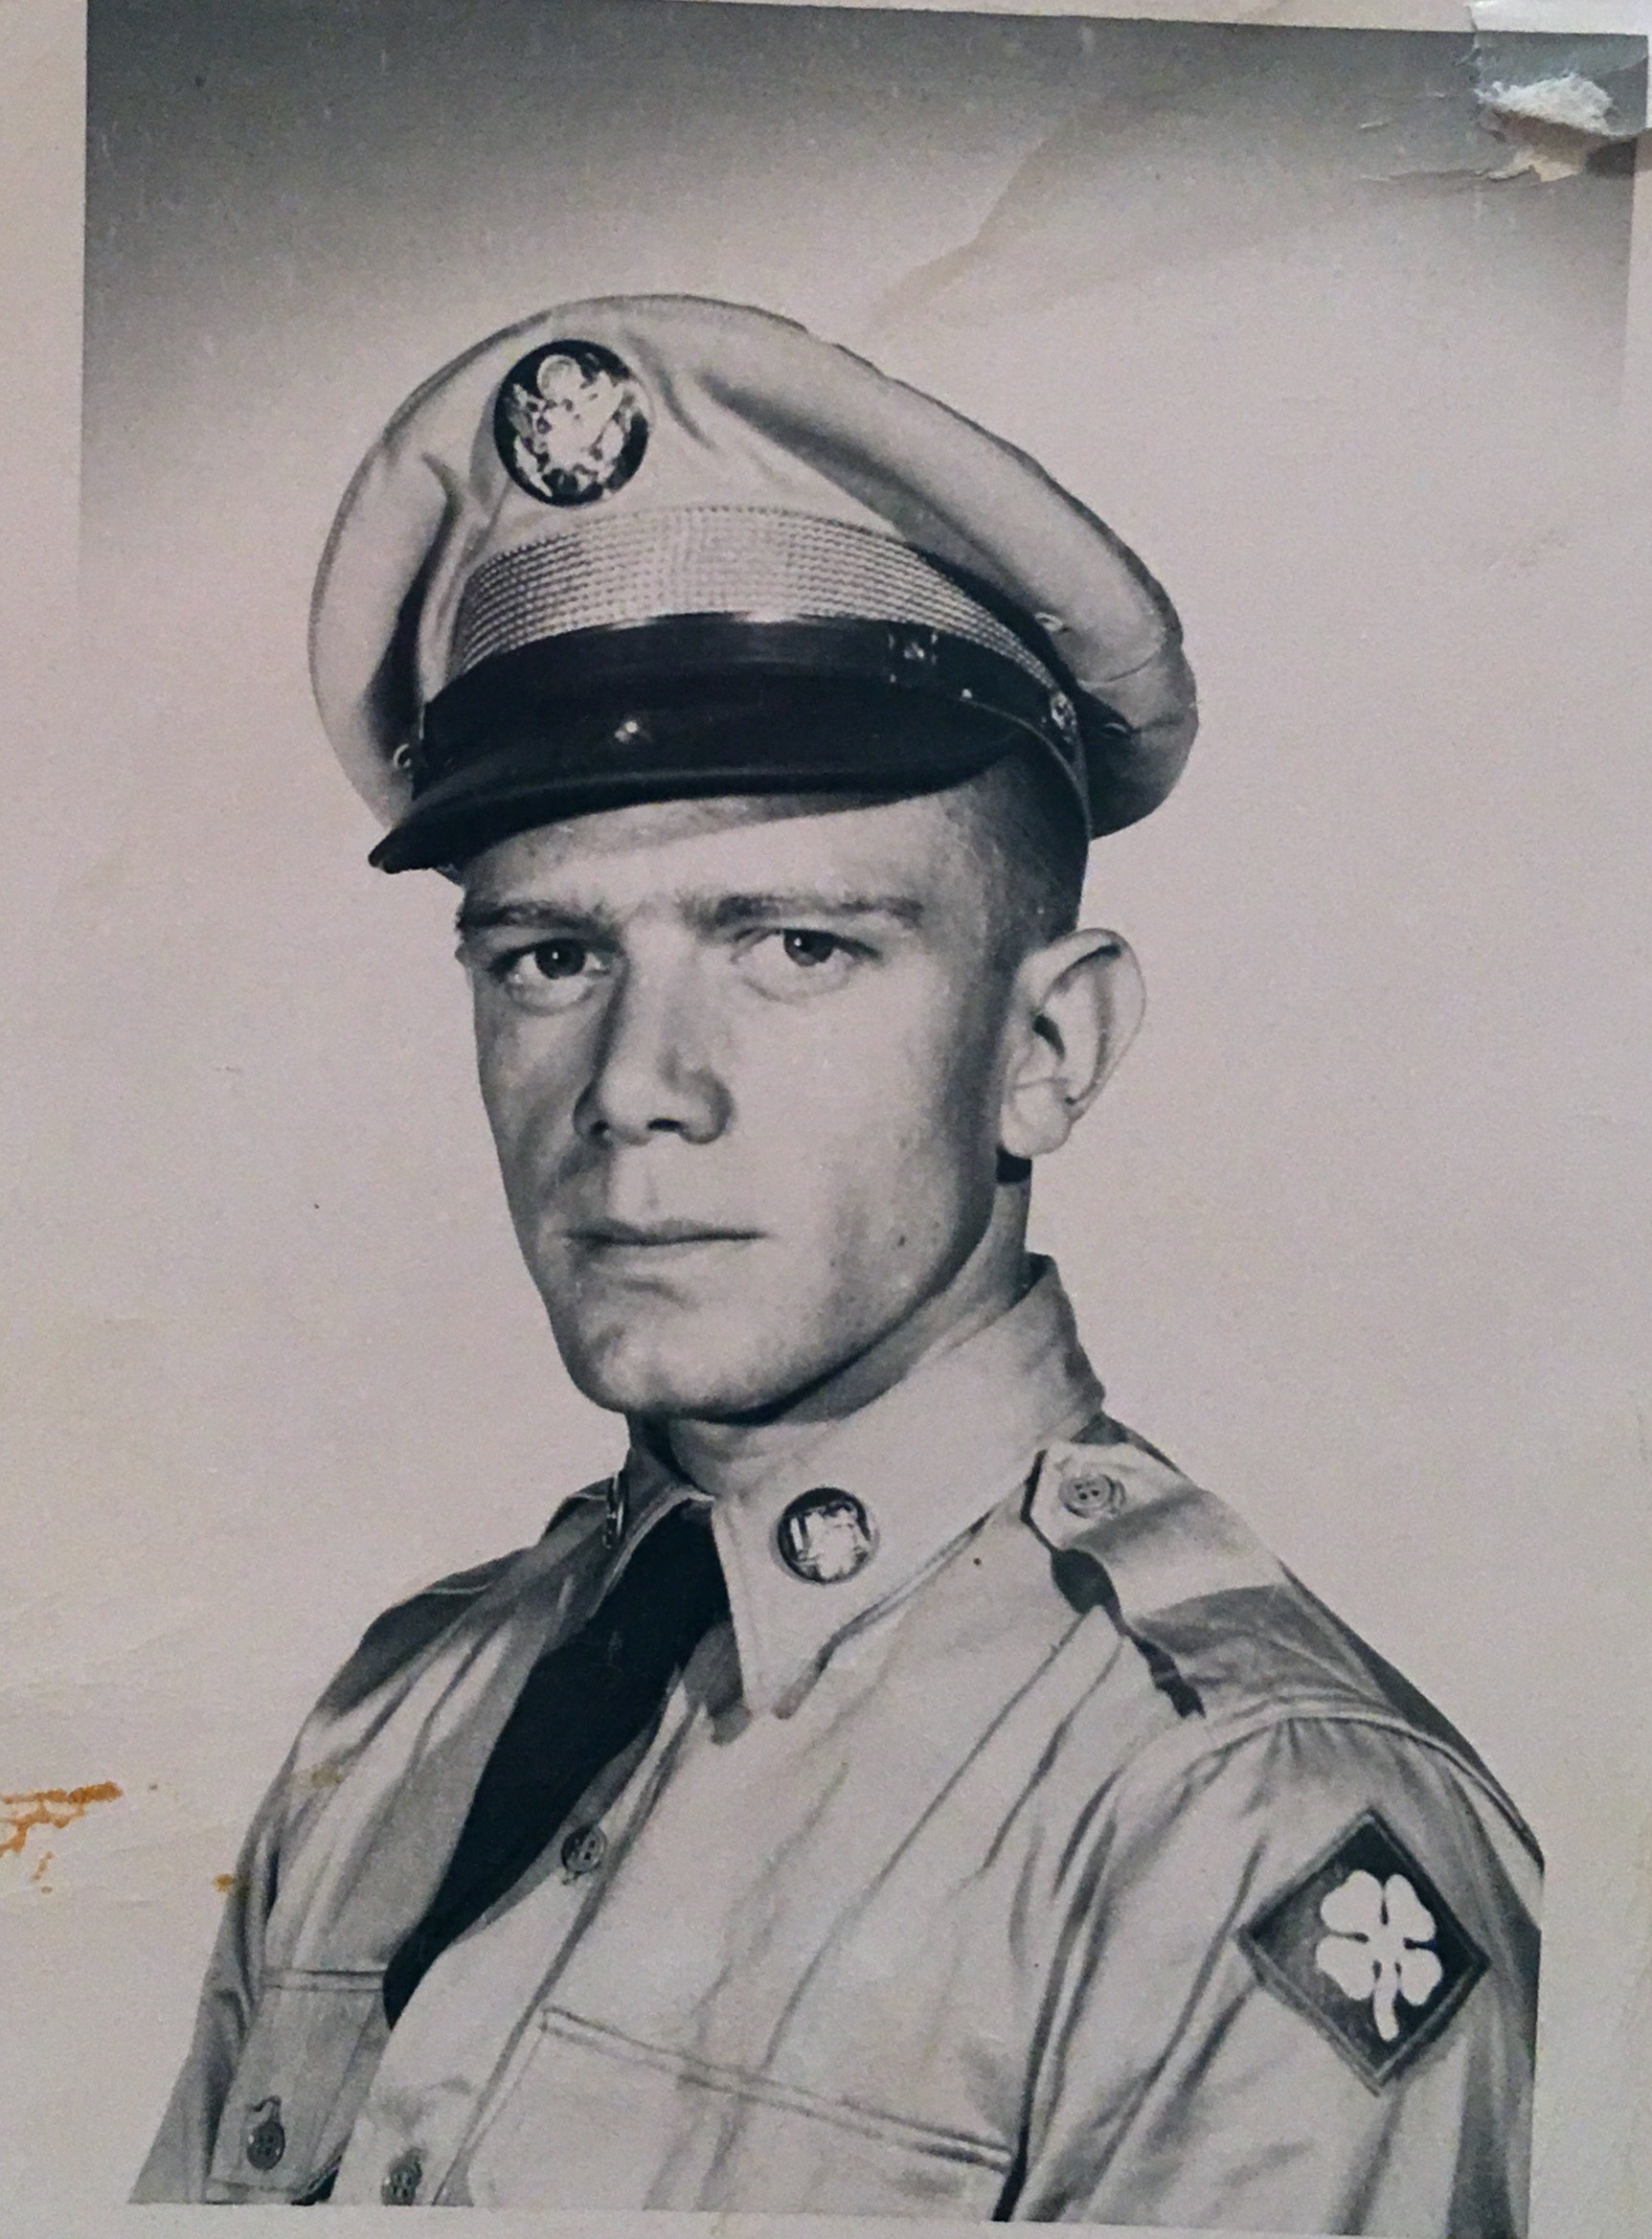 Jack Riddles in military uniform